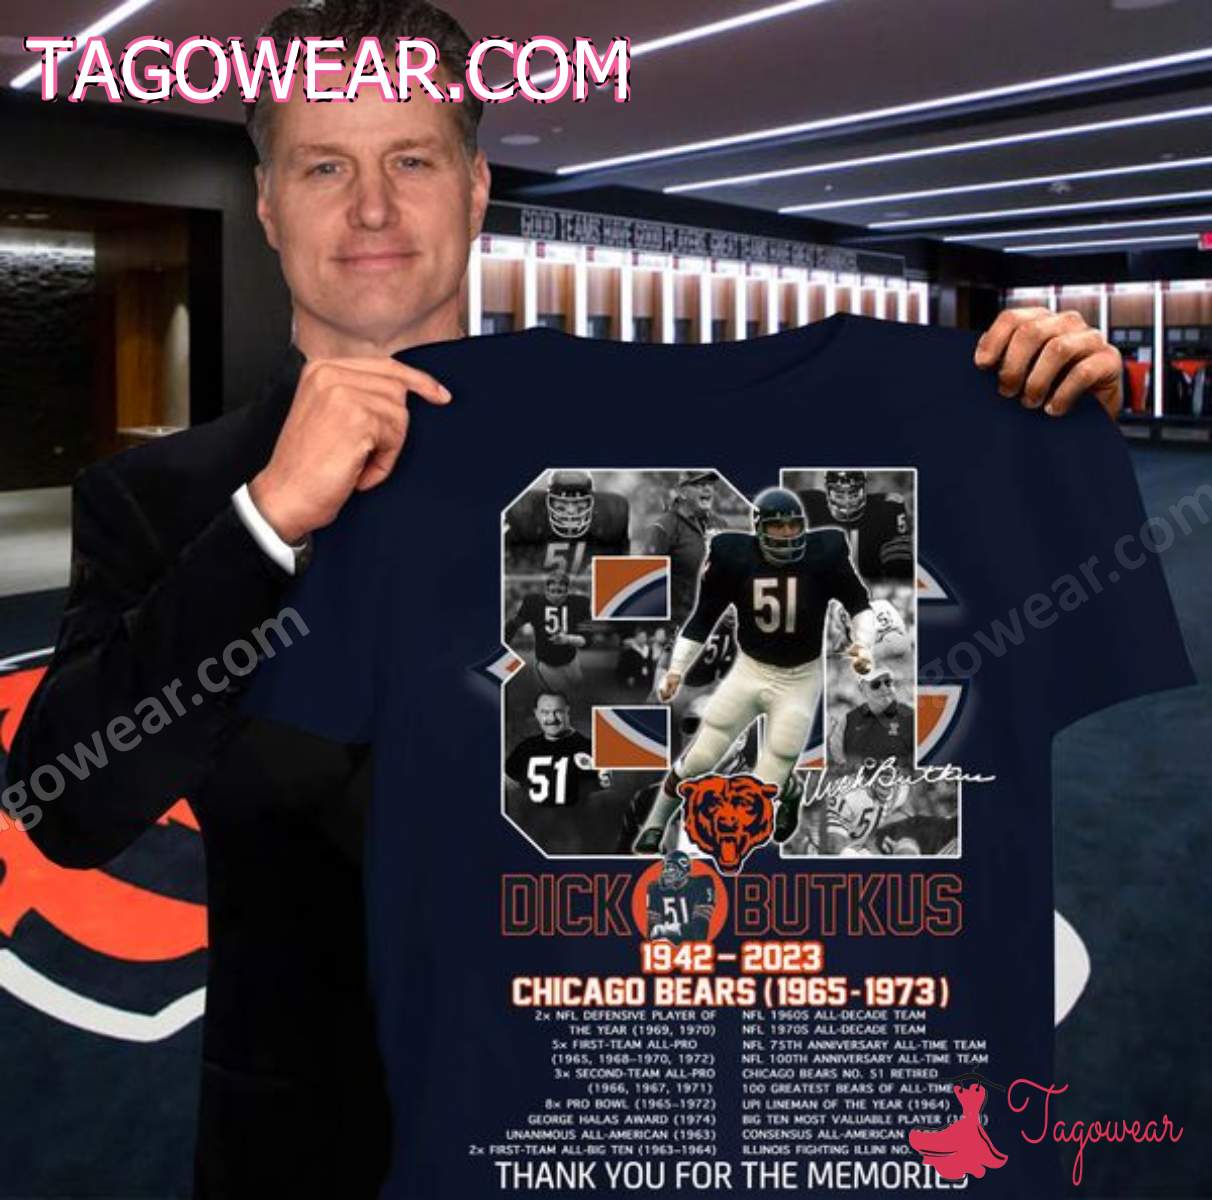 81 Years Dick Butkus 1942-2023 Chicago Bears 1965-1973 Thank You For The Memories Shirt